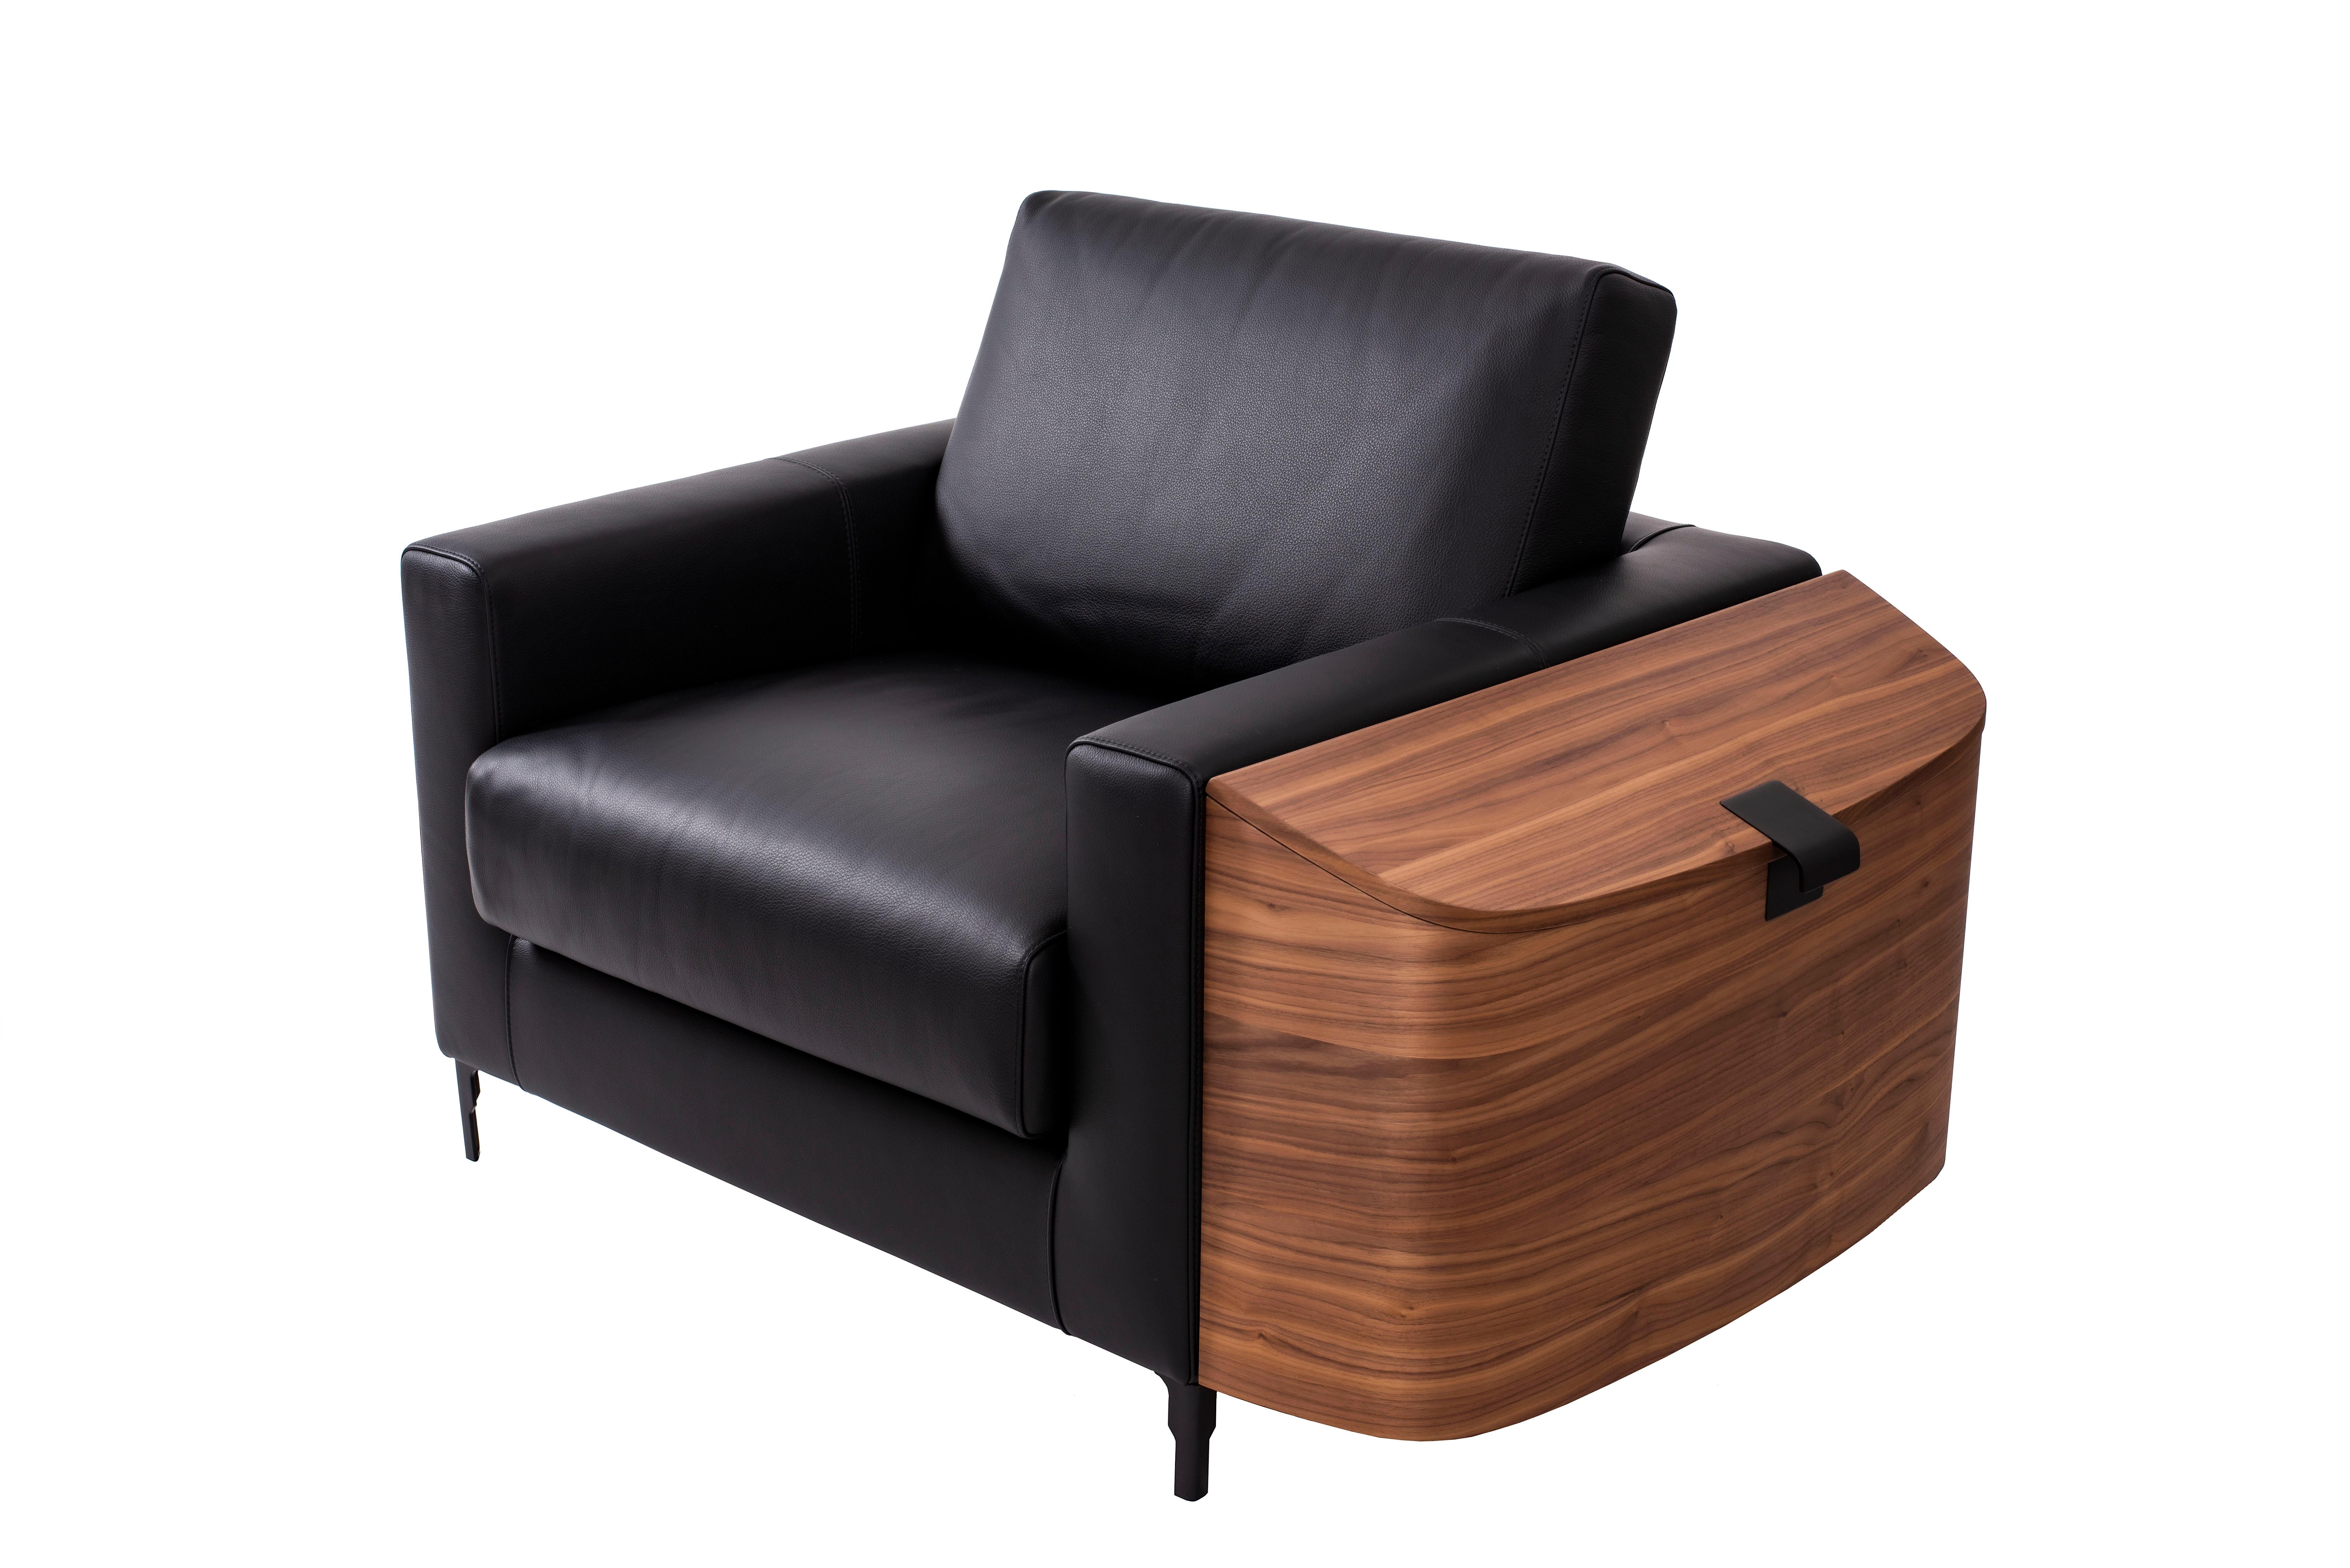 Contemporary armchair Saddlebag by Cyril Rumpler black leather. The armchair equipped with a chest covered in Canaletto walnut veneer. This armchair is also equipped with metal legs and handle available in chrome, champagne or black. This seat can